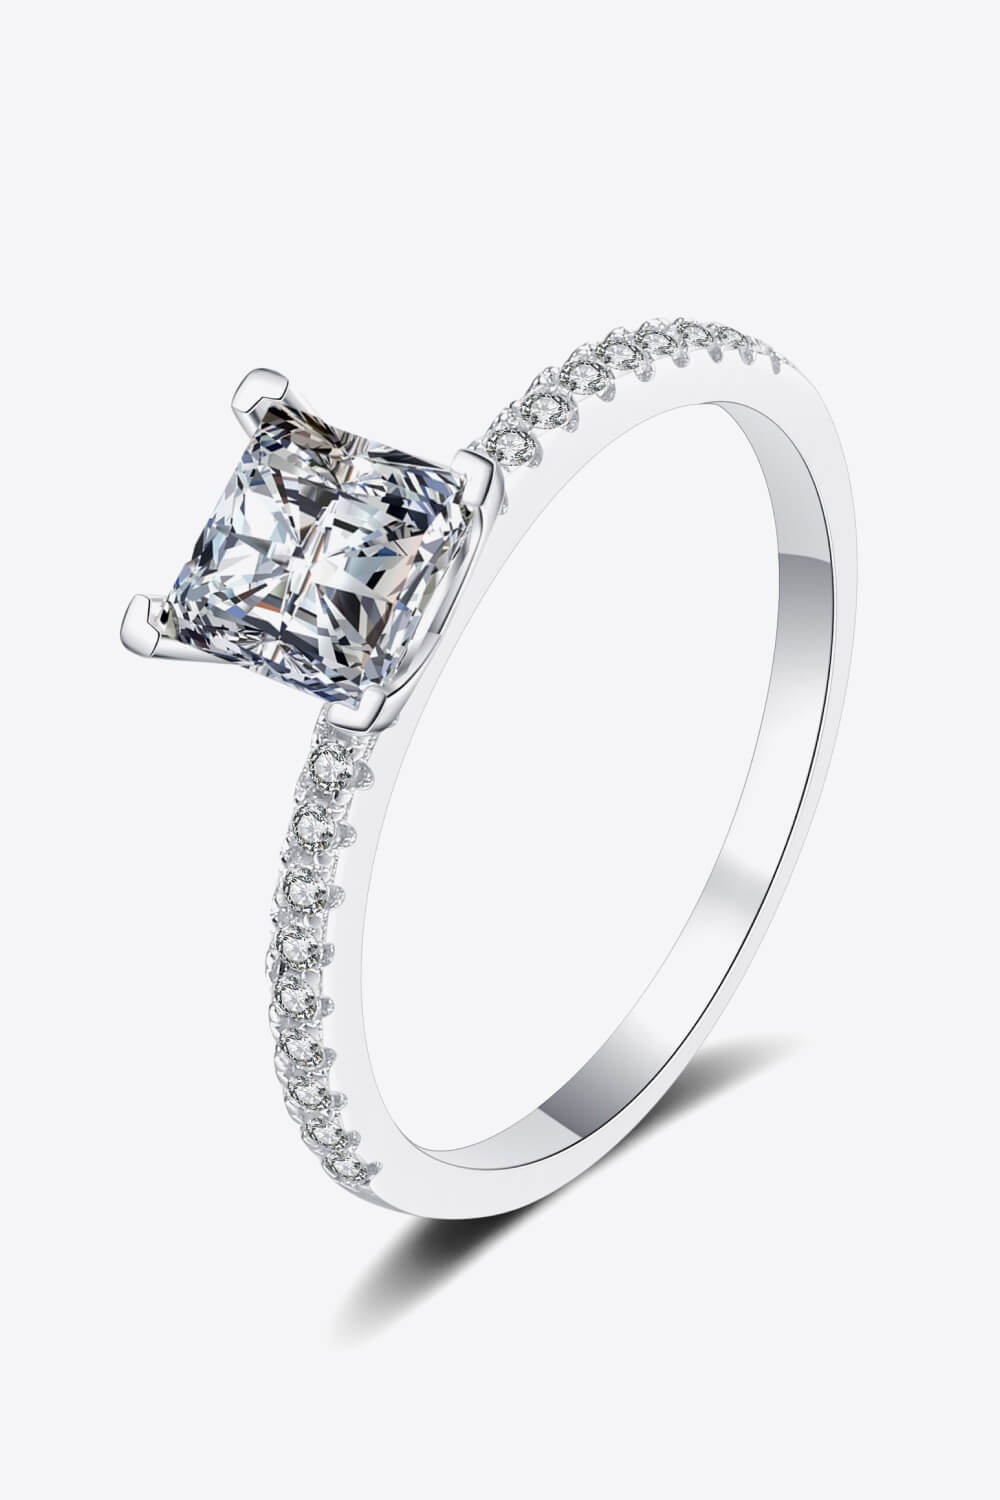 2 Carat Radiant-Cut Moissanite Four-Prong Ring (Rhodium Over Pure Sterling Silver) - Sparkala